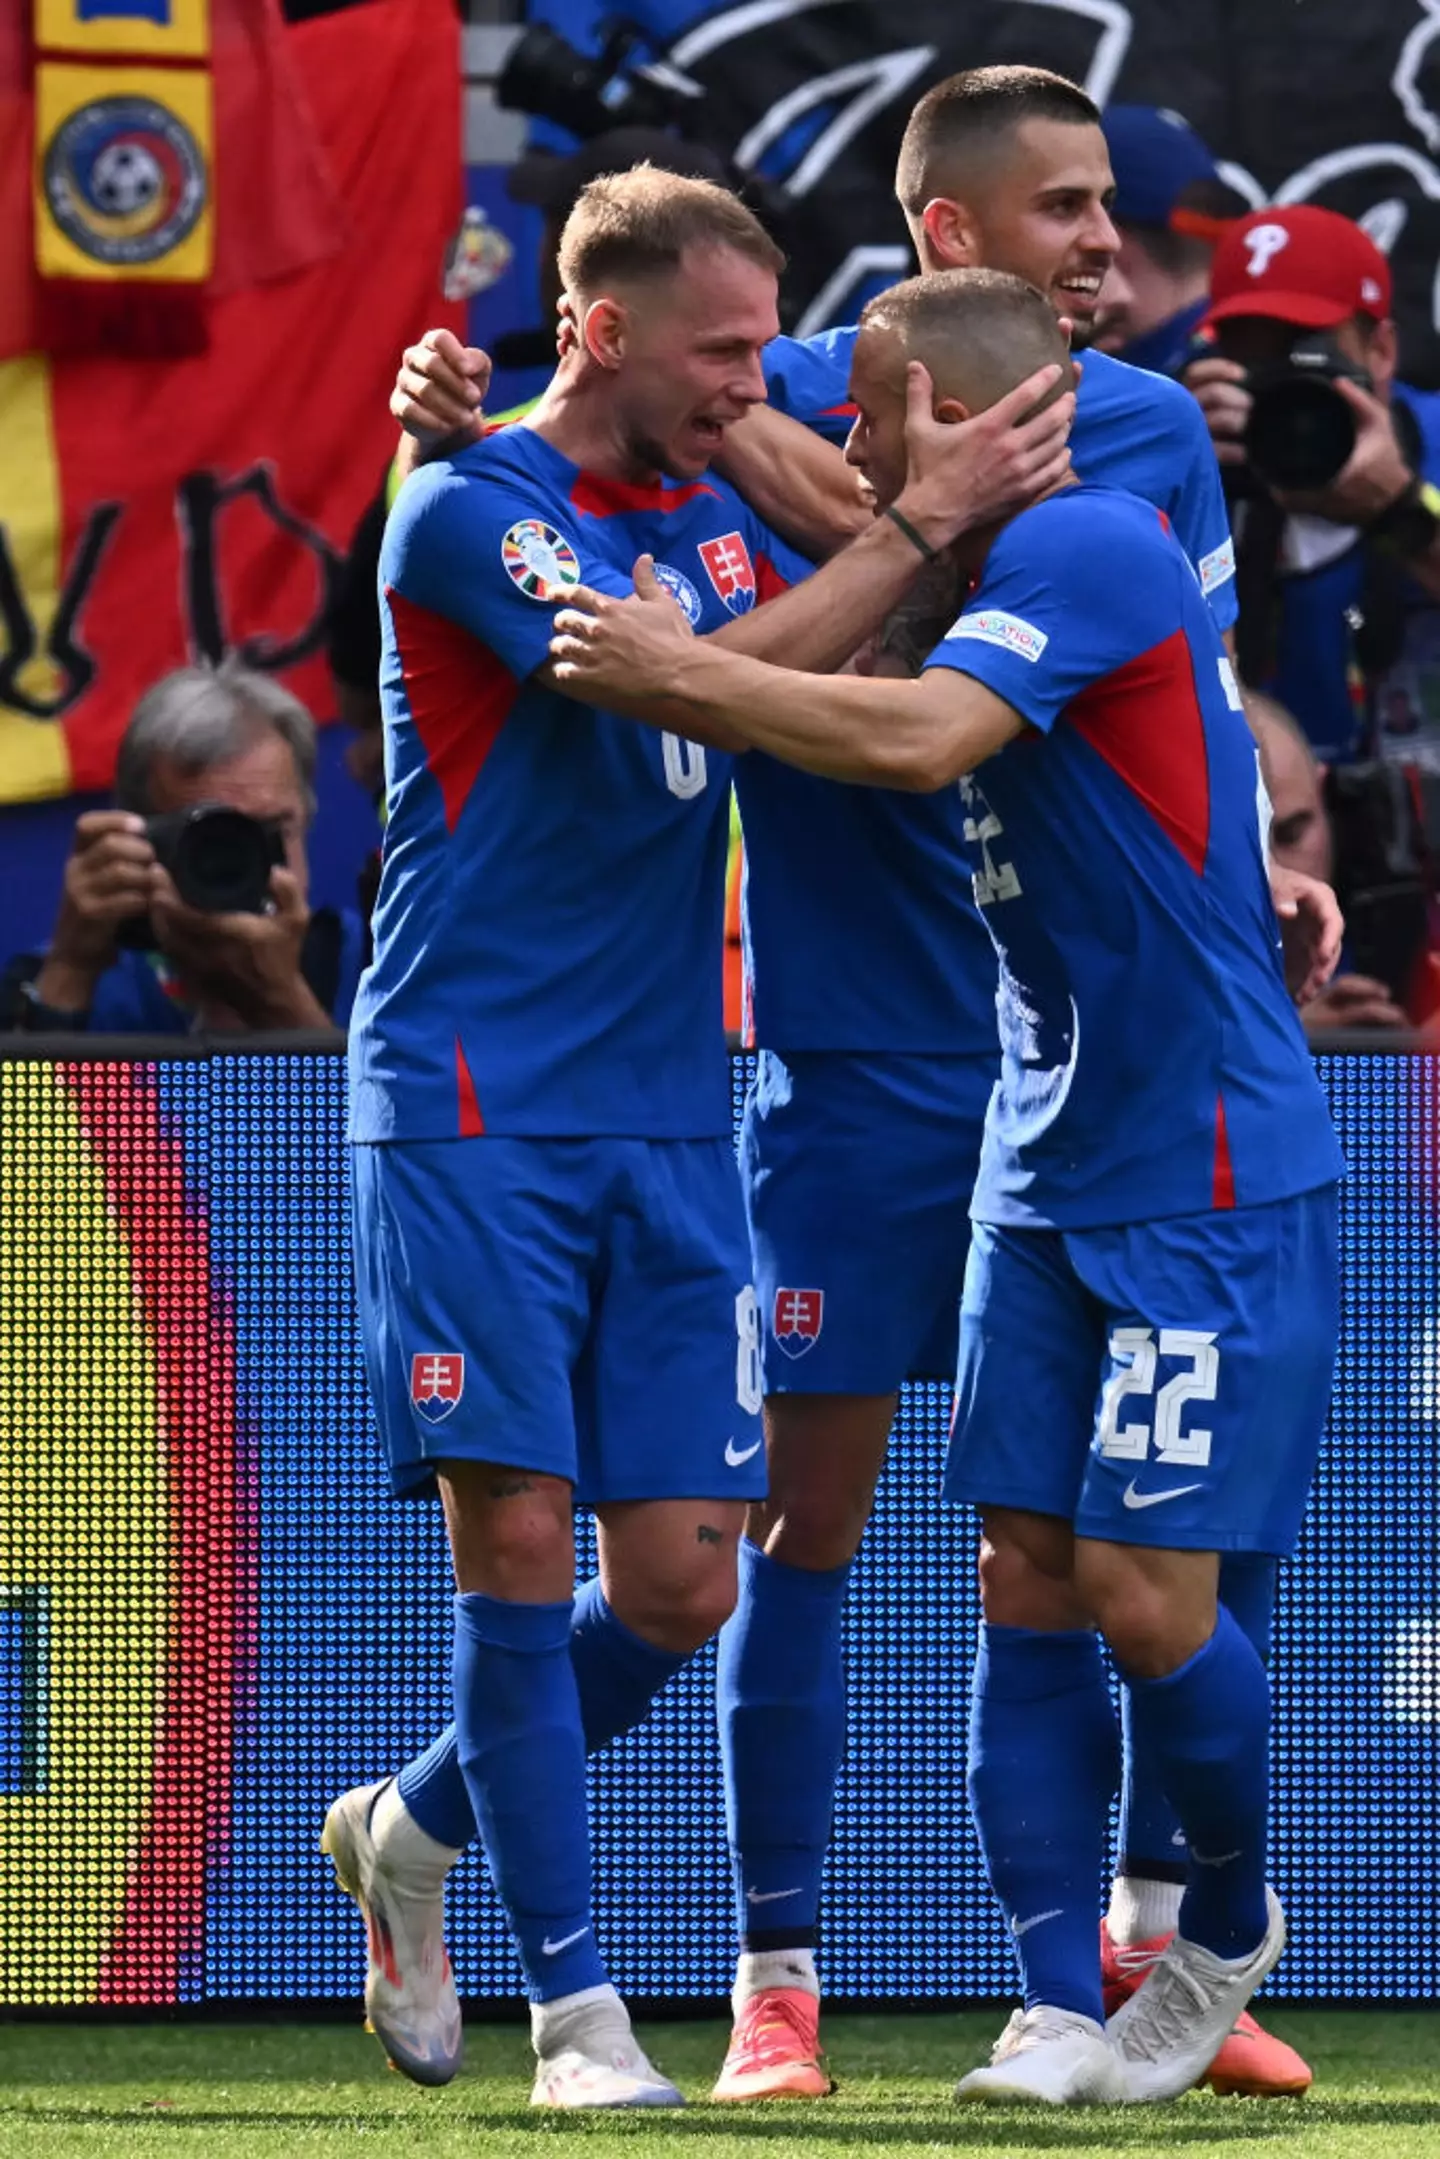 Stanislav Lobotka celebrated with teammate Ondrej Duda, who opened the scoreline for Slovakia in the 1-1 draw with Romania. (Image: Getty) 